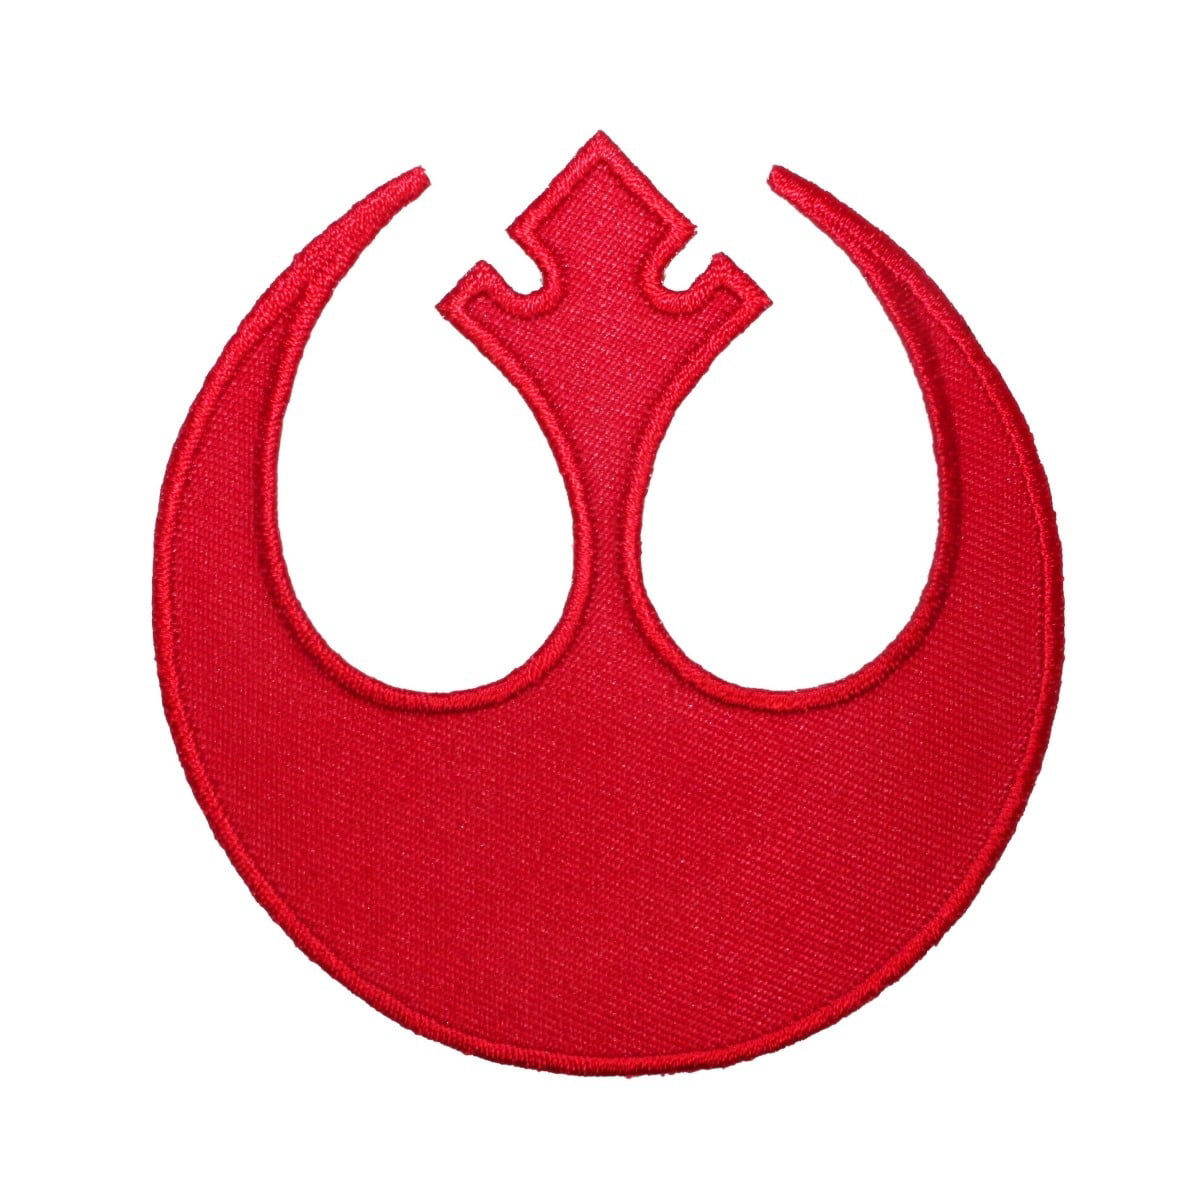 Rebel Alliance Cosplay Iron On Sew On Embroidered Patch